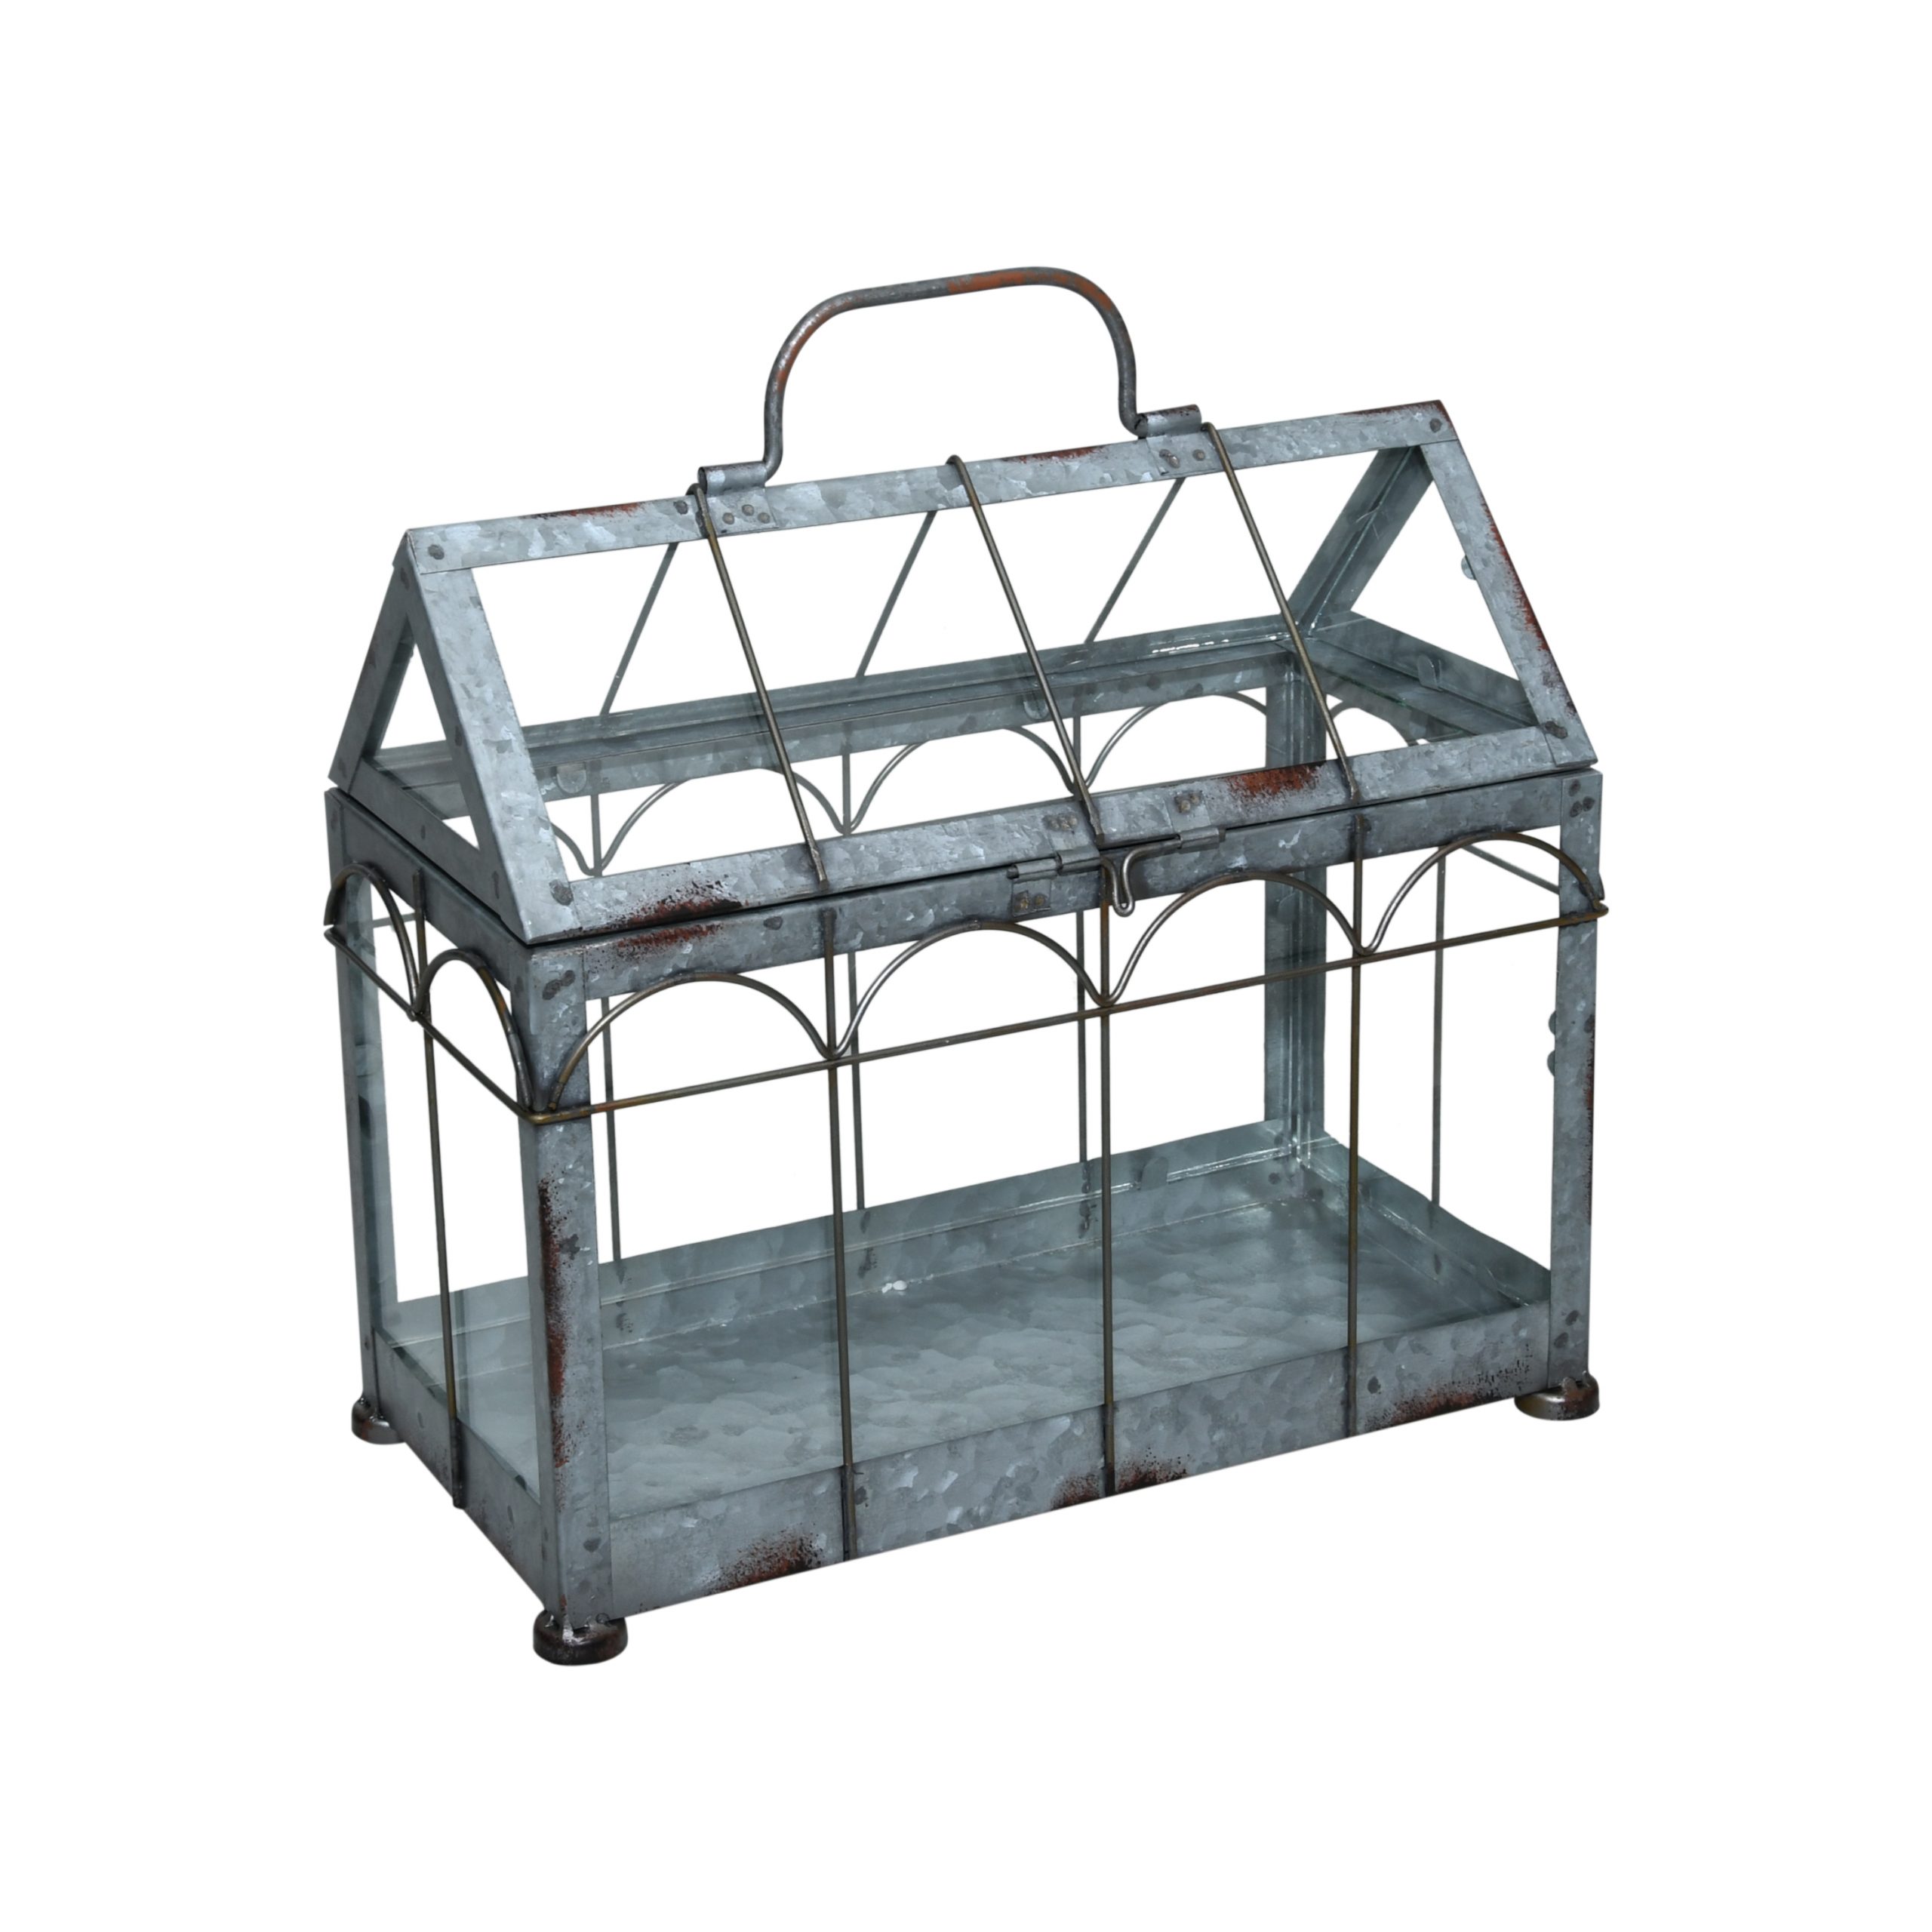 A Guide to Choosing and Maintaining a Small Metal Greenhouse for Your Home Garden